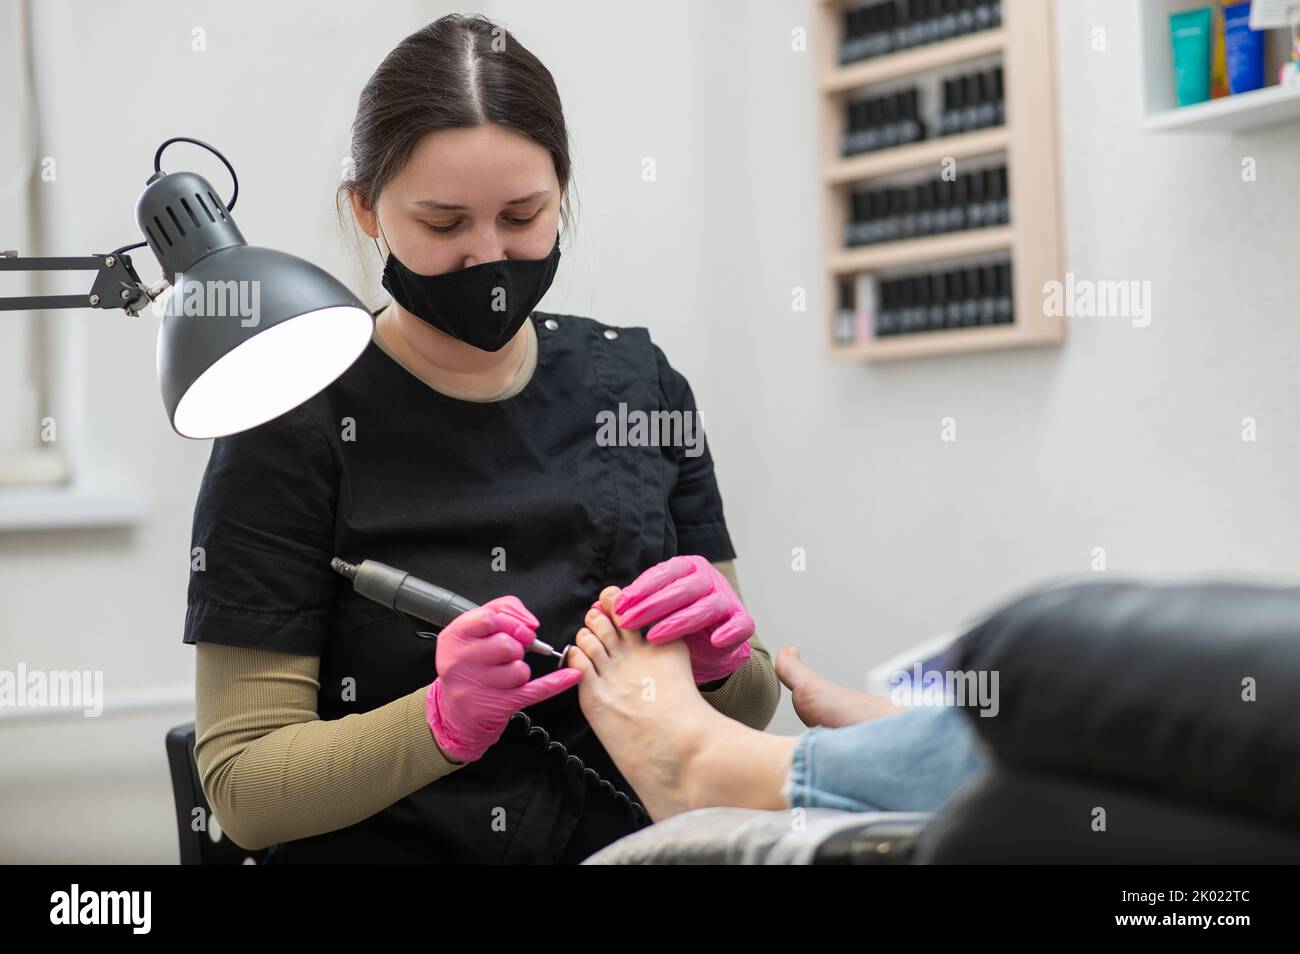 The pedicure master processes the client's foot using an apparatus with an abrasive disc. Stock Photo